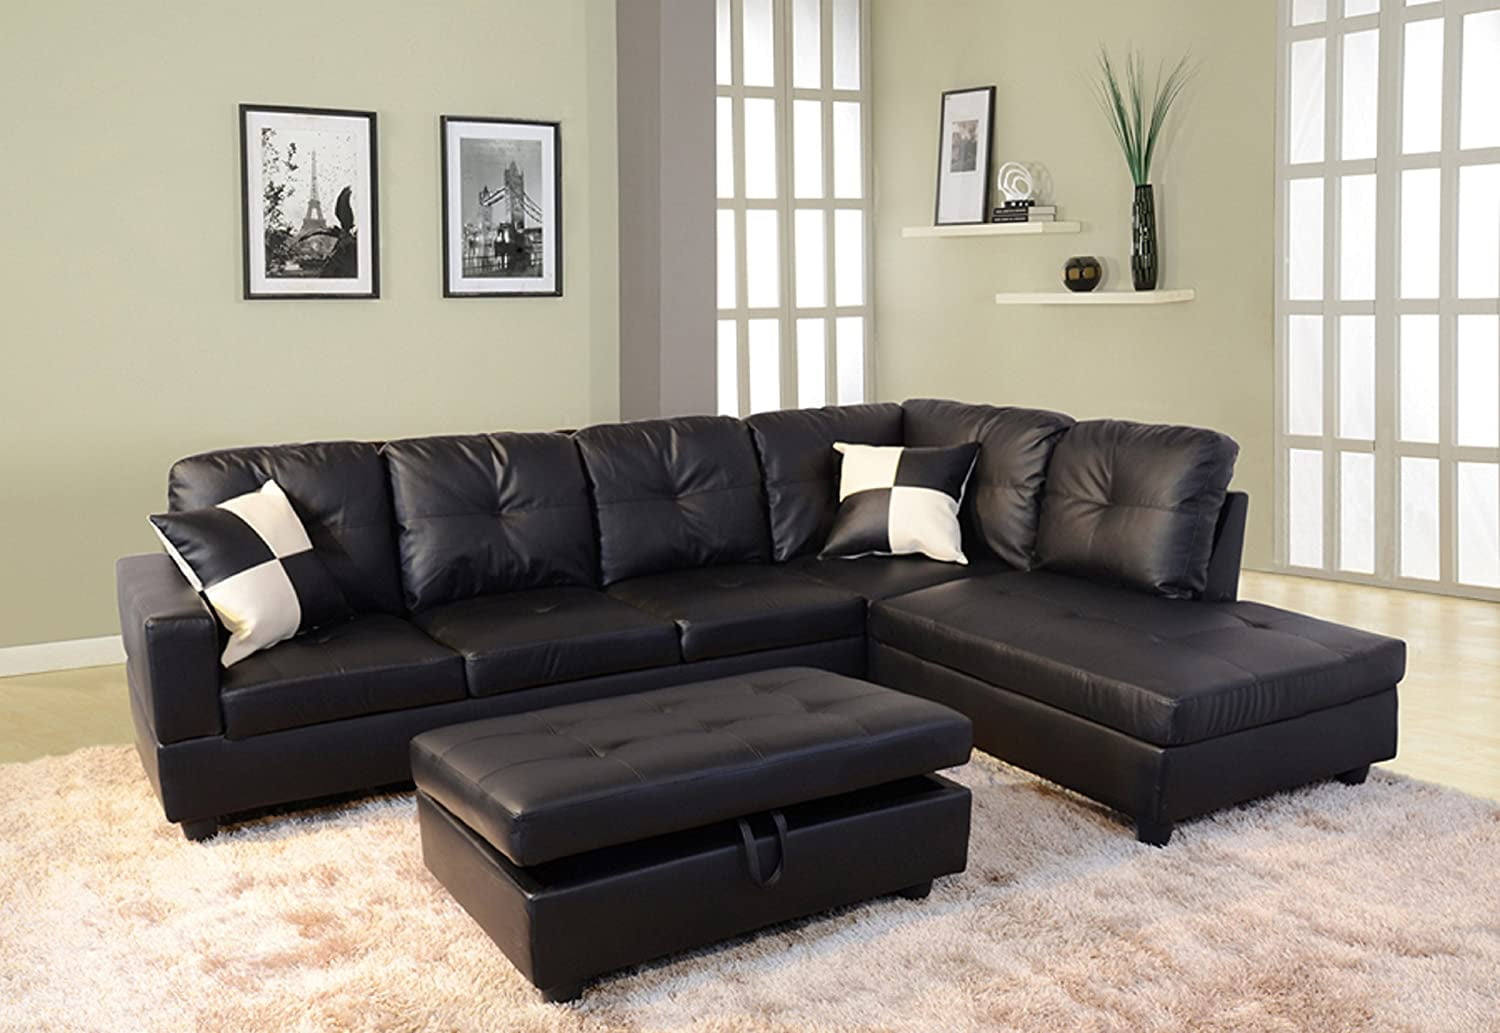 Faux Leather Sectional Sofa Couch Set, Leather Sectional In Living Room